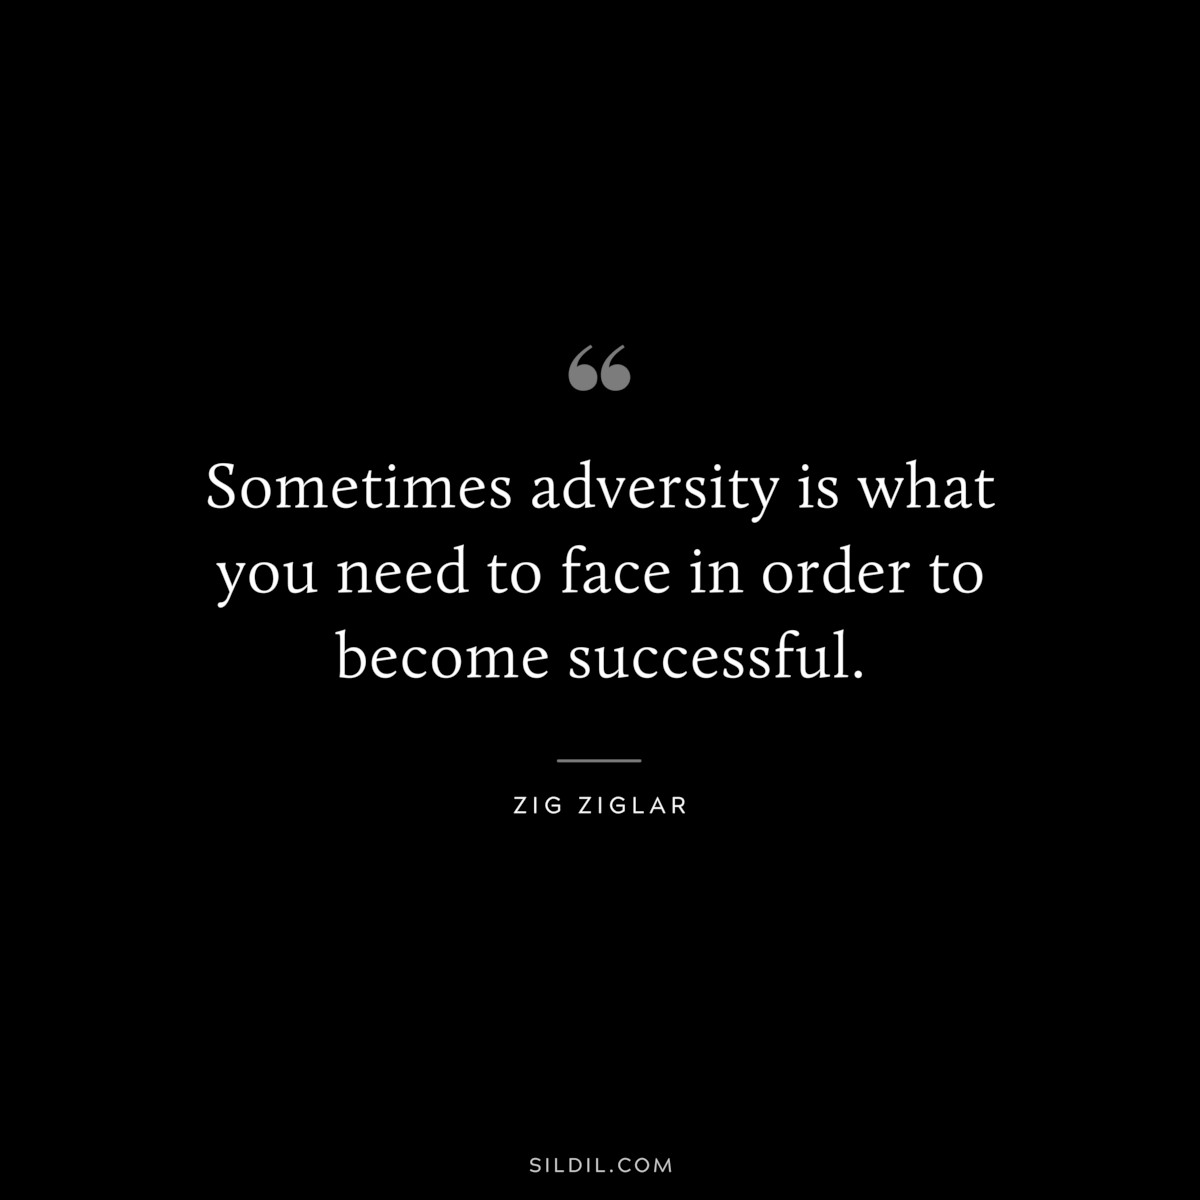 Sometimes adversity is what you need to face in order to become successful. ― Zig Ziglar